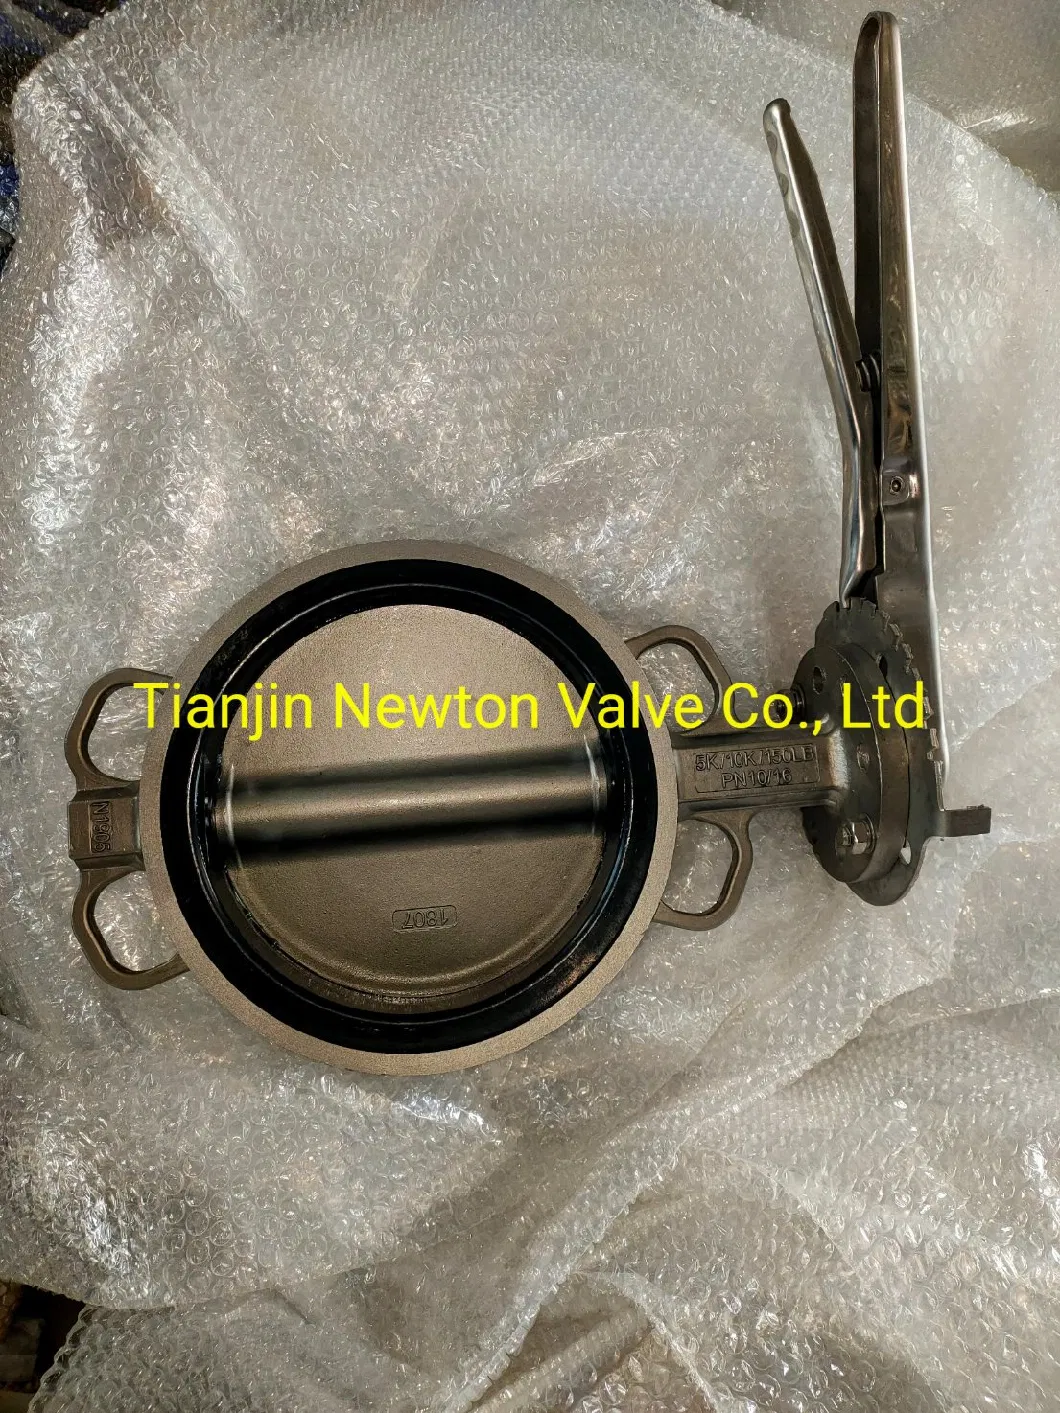 Saf2205 Saf2507 1.4529 1.4469 1.4462 1.4408 CF3 CF3m F53 F55 Ss Duplex Stainless Steel Wafer Butterfly Valve From Tianjin Valve Factory